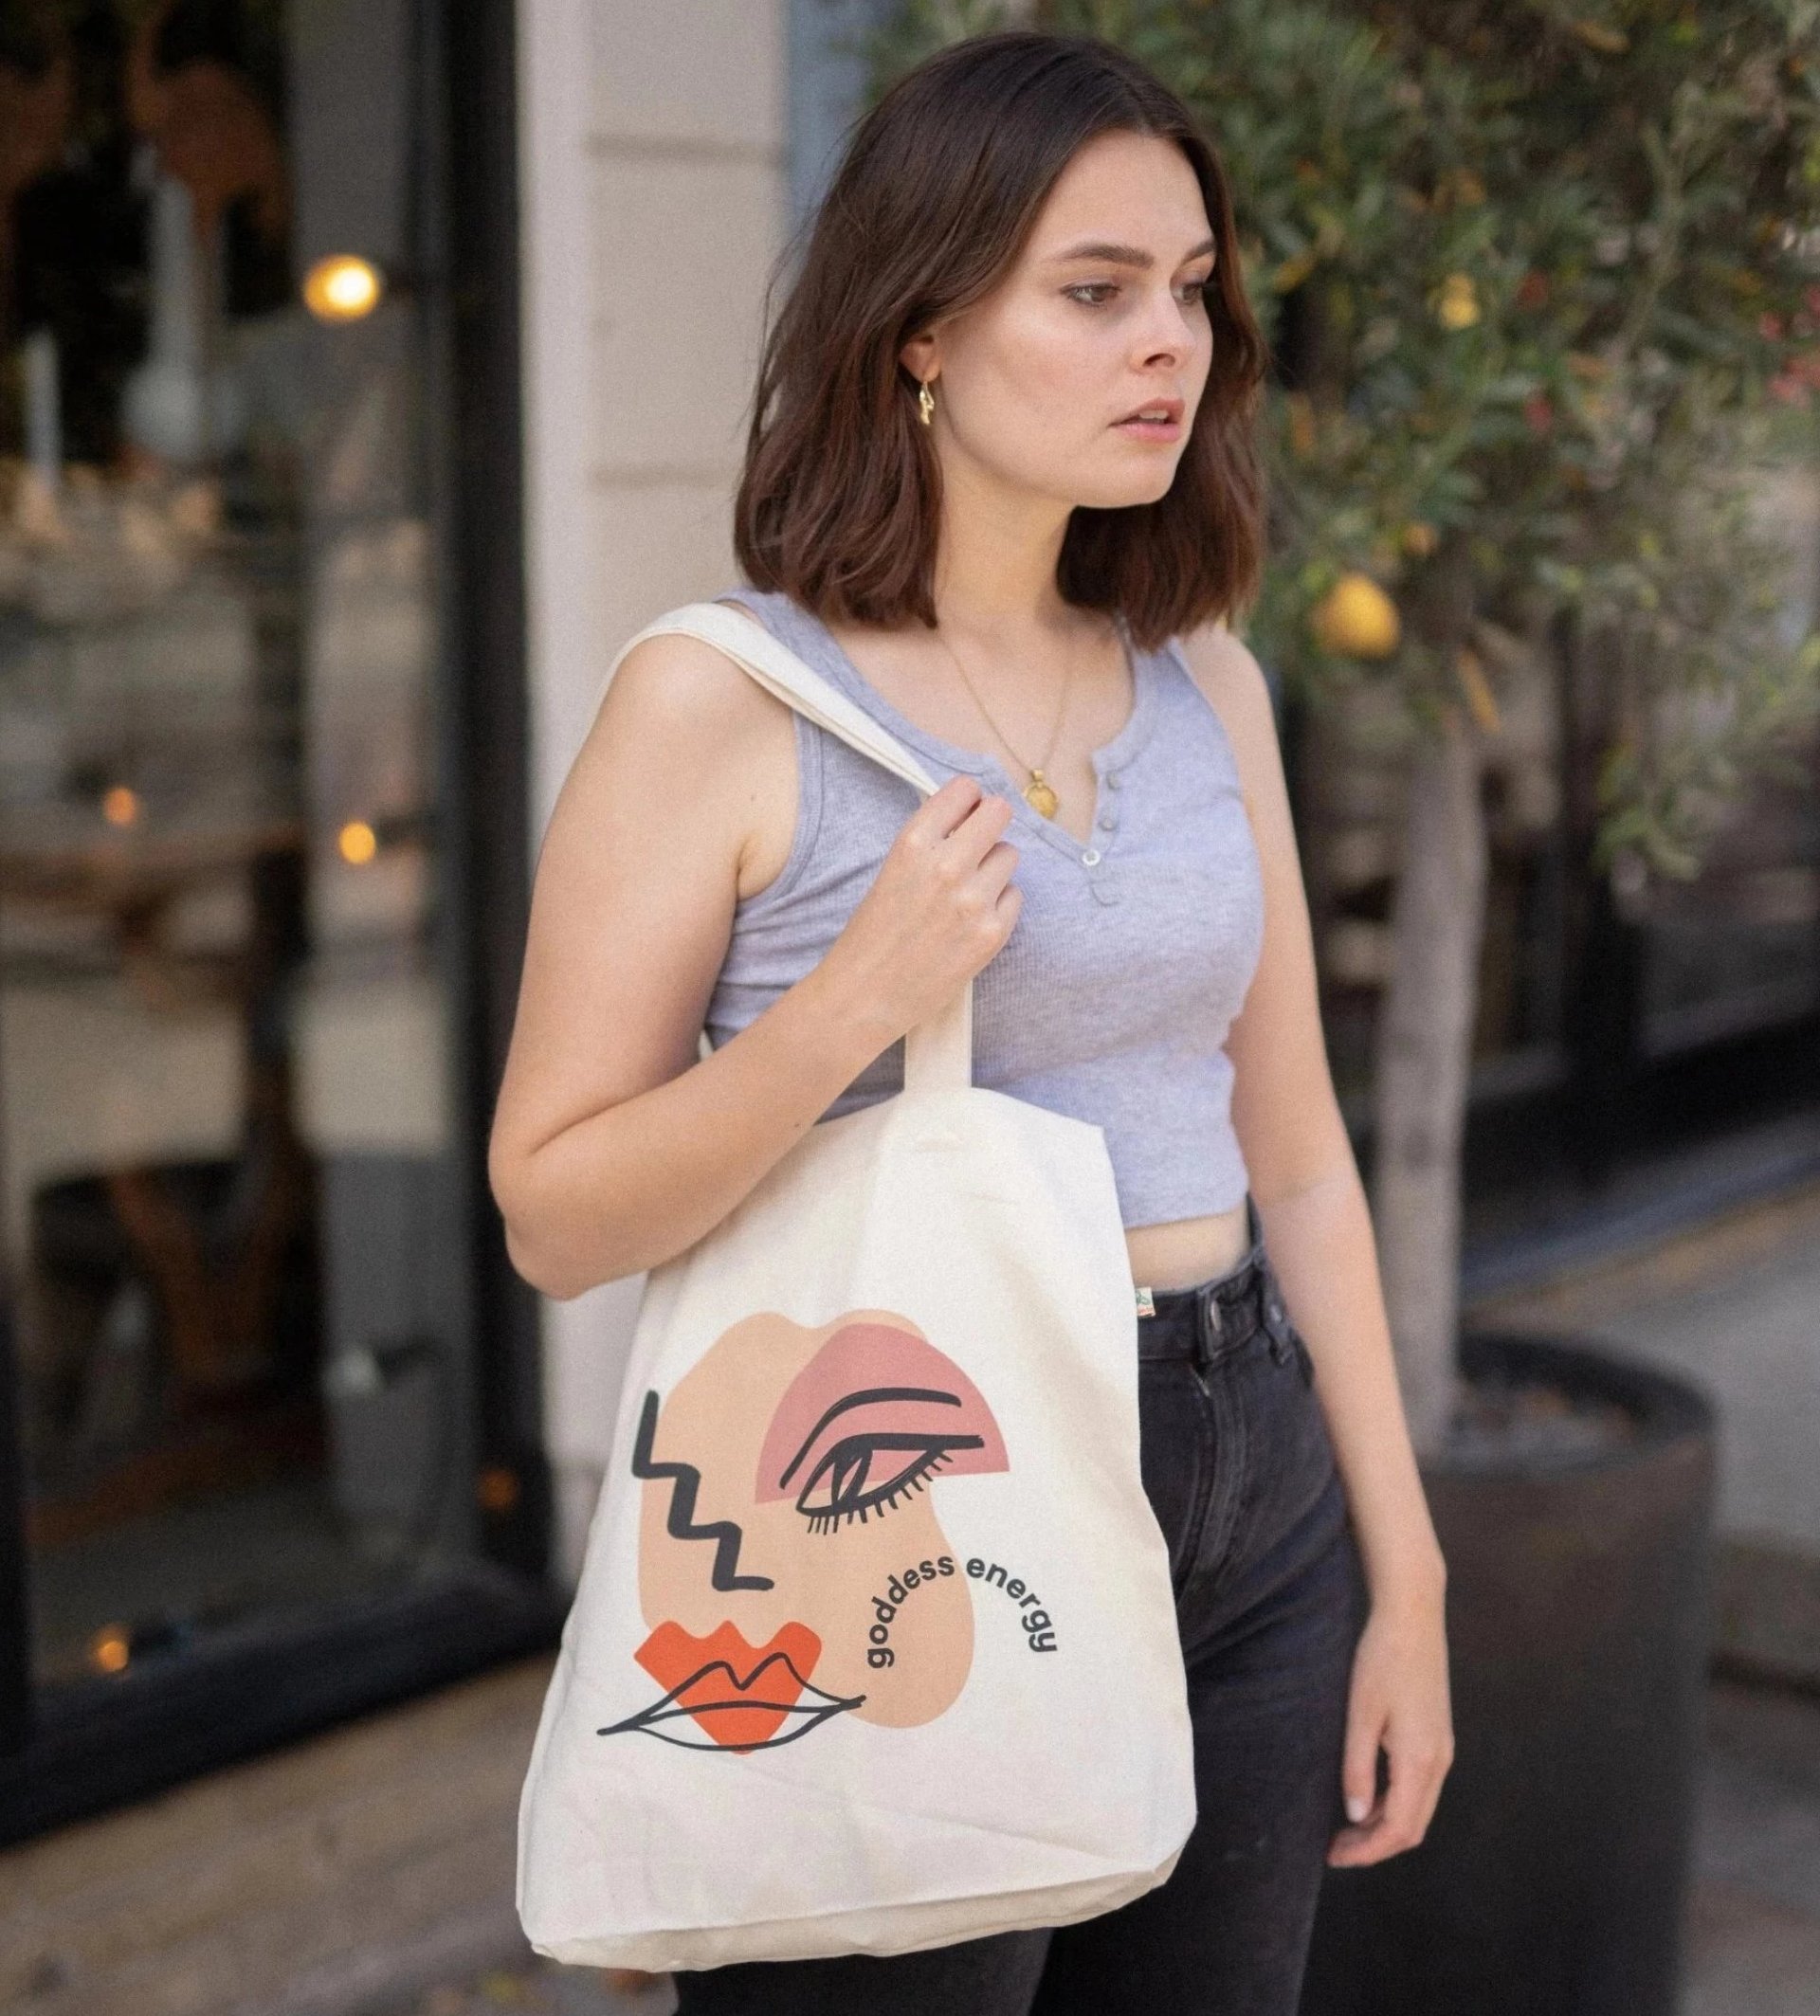 Lucy Moon with her Goddess Energy Tote